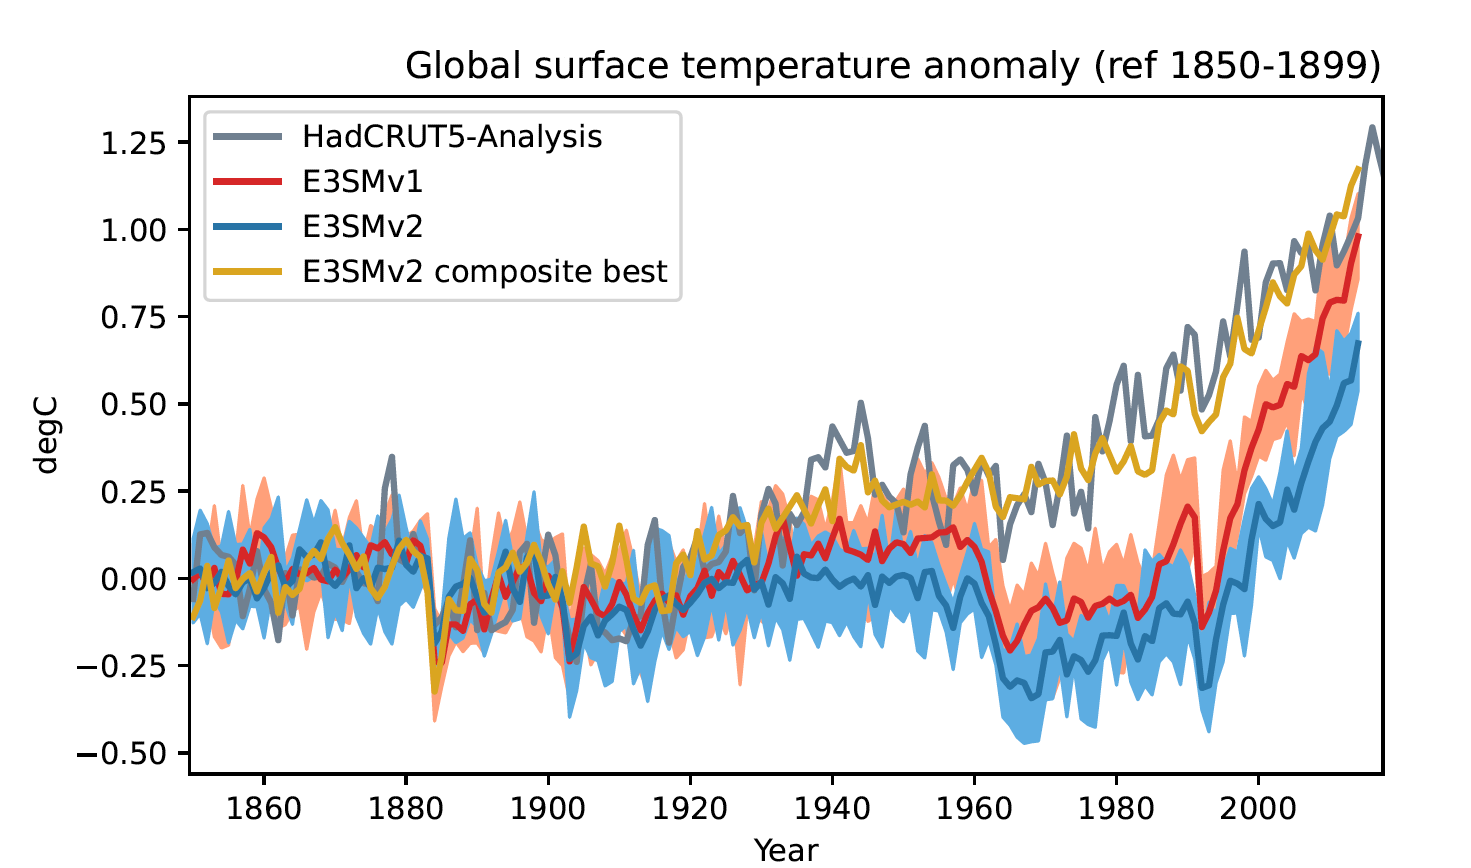 Figure 3: Time evolution of annual global mean surface temperature anomalies (with respect to 1850-1899). Comparison between observations from HadCRUT5-Analysis (grey), E3SMv1 ensemble mean (red) and range (orange) and E3SMv2 ensemble mean (dark blue) and range (light blue). Also shown (gold) is a best estimate obtained by scaling E3SMv2 greenhouse-gases and aerosol single forcing simulations.